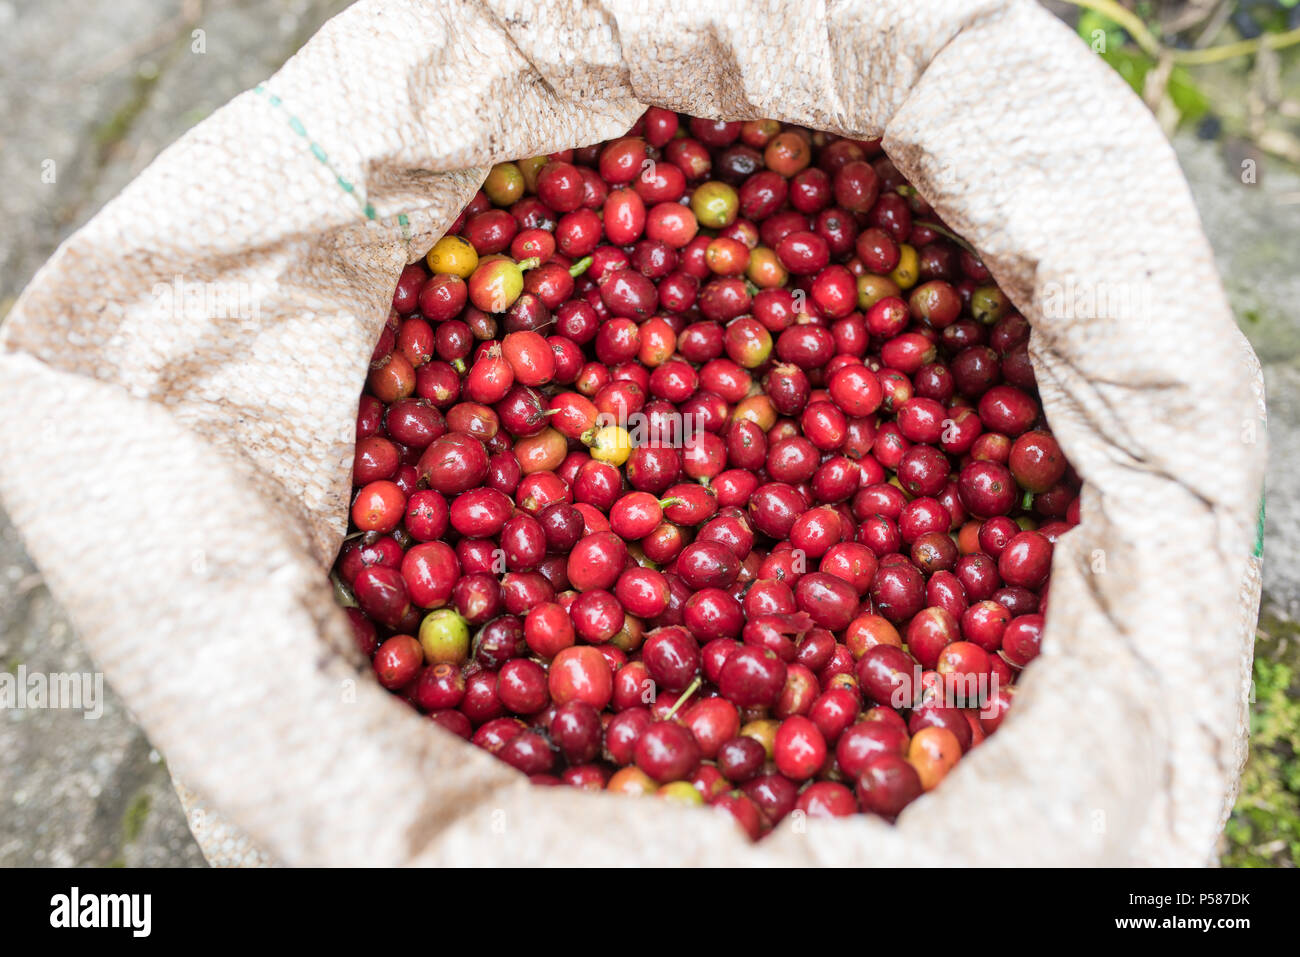 Red ripe coffee beans in bag Stock Photo